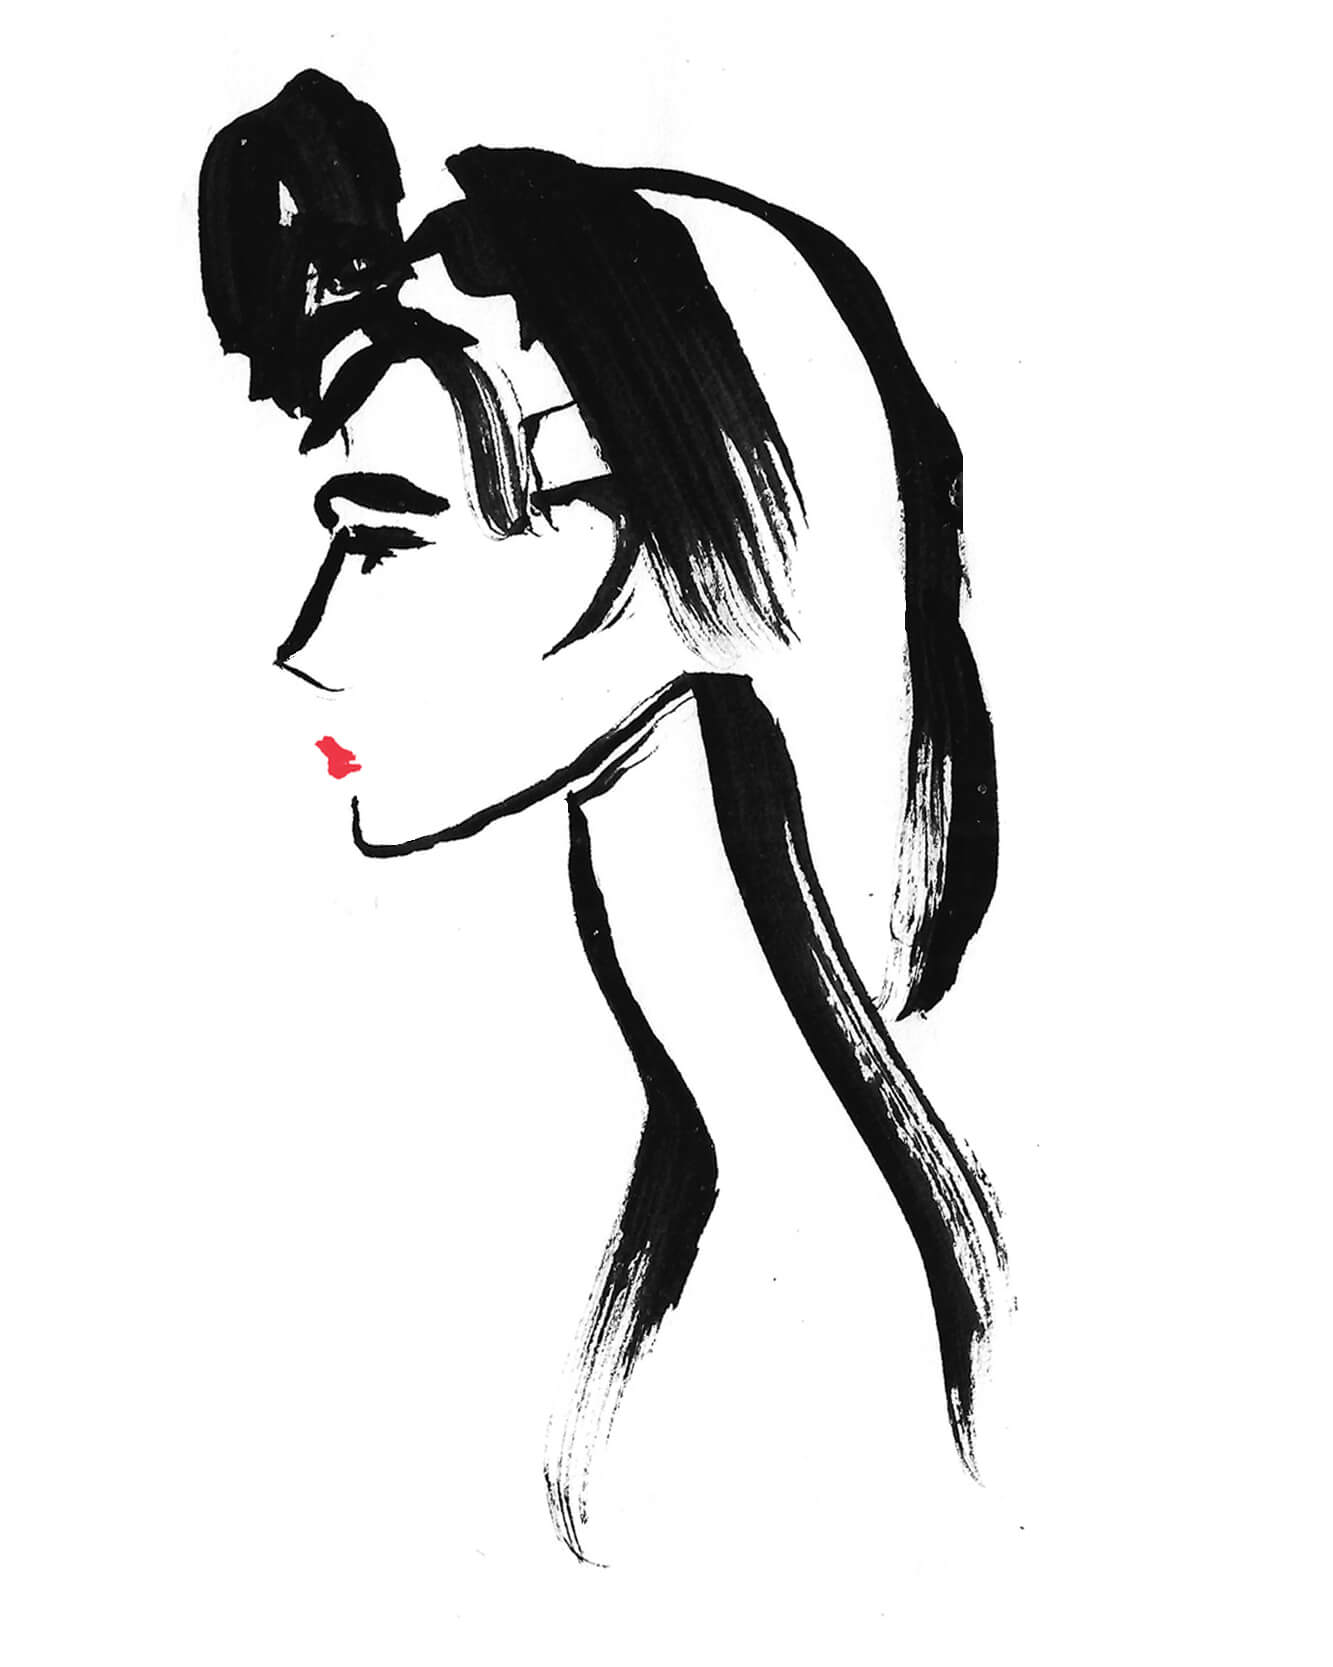 Illustrations for International Women's Day, individual profile drawings. Inky lines fashion illustration inspired illustration. Illustration style of bold black inky brush stroke marks. With simple black ink links and red lipstick. 